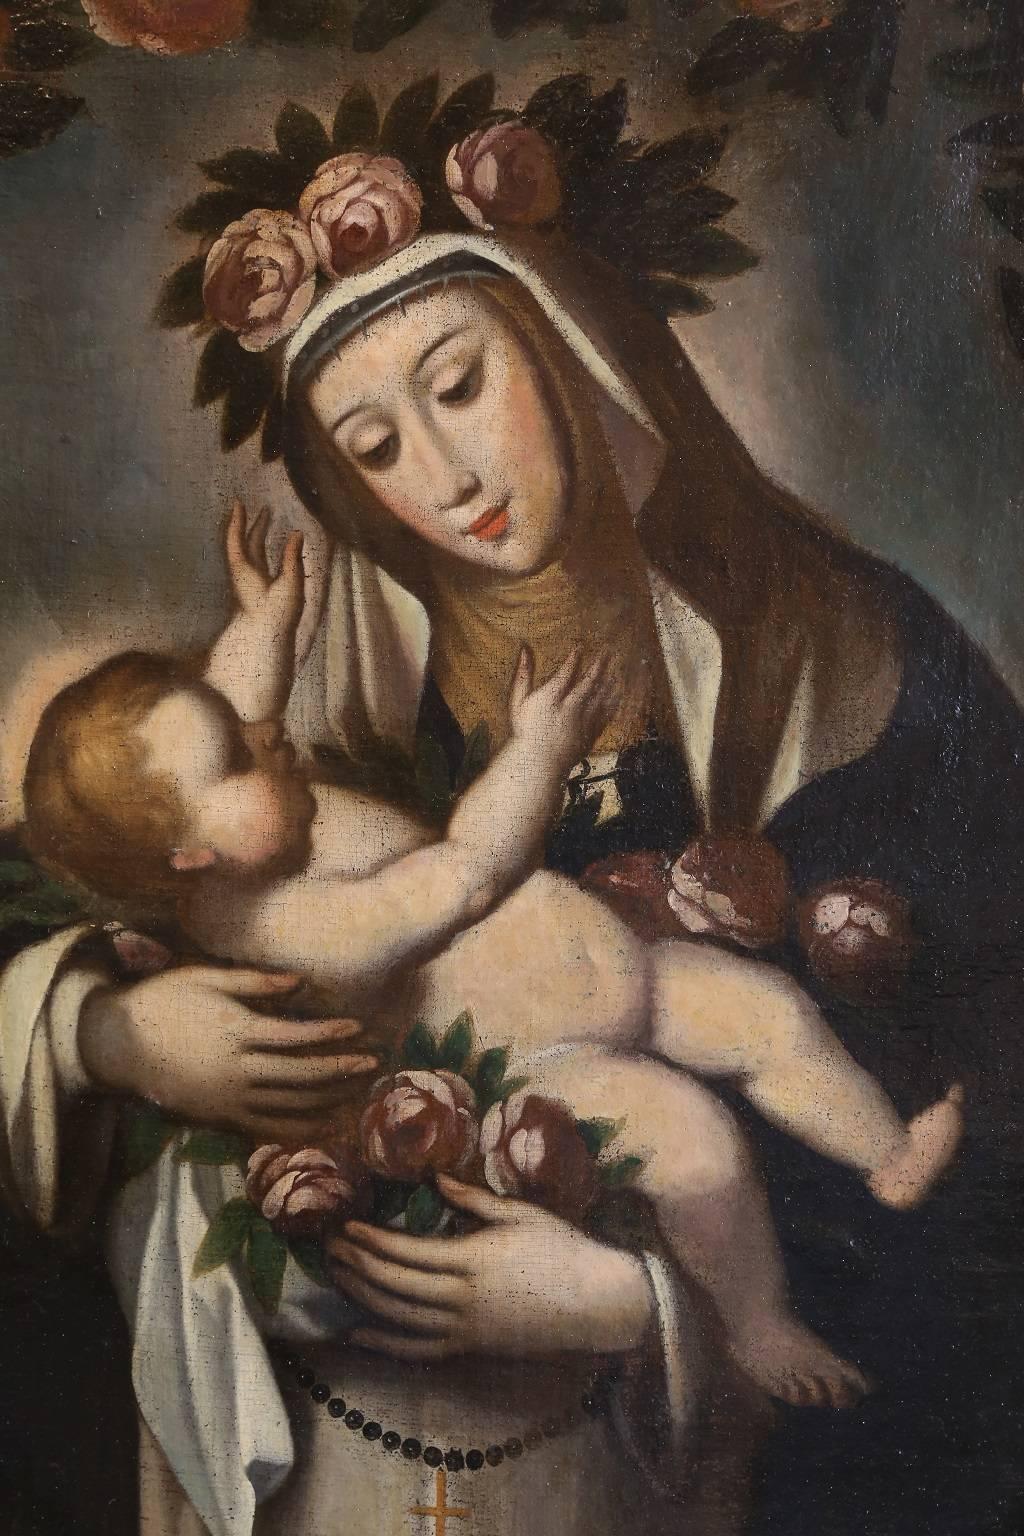 Late 18th century oil on canvas of the virgin with child, by an unknown artist in the Cuzco School style, set in a decorative giltwood frame. Restored, with some small patches. The Cuzco School (Escuela Cuzqueña) was a Roman Catholic artistic